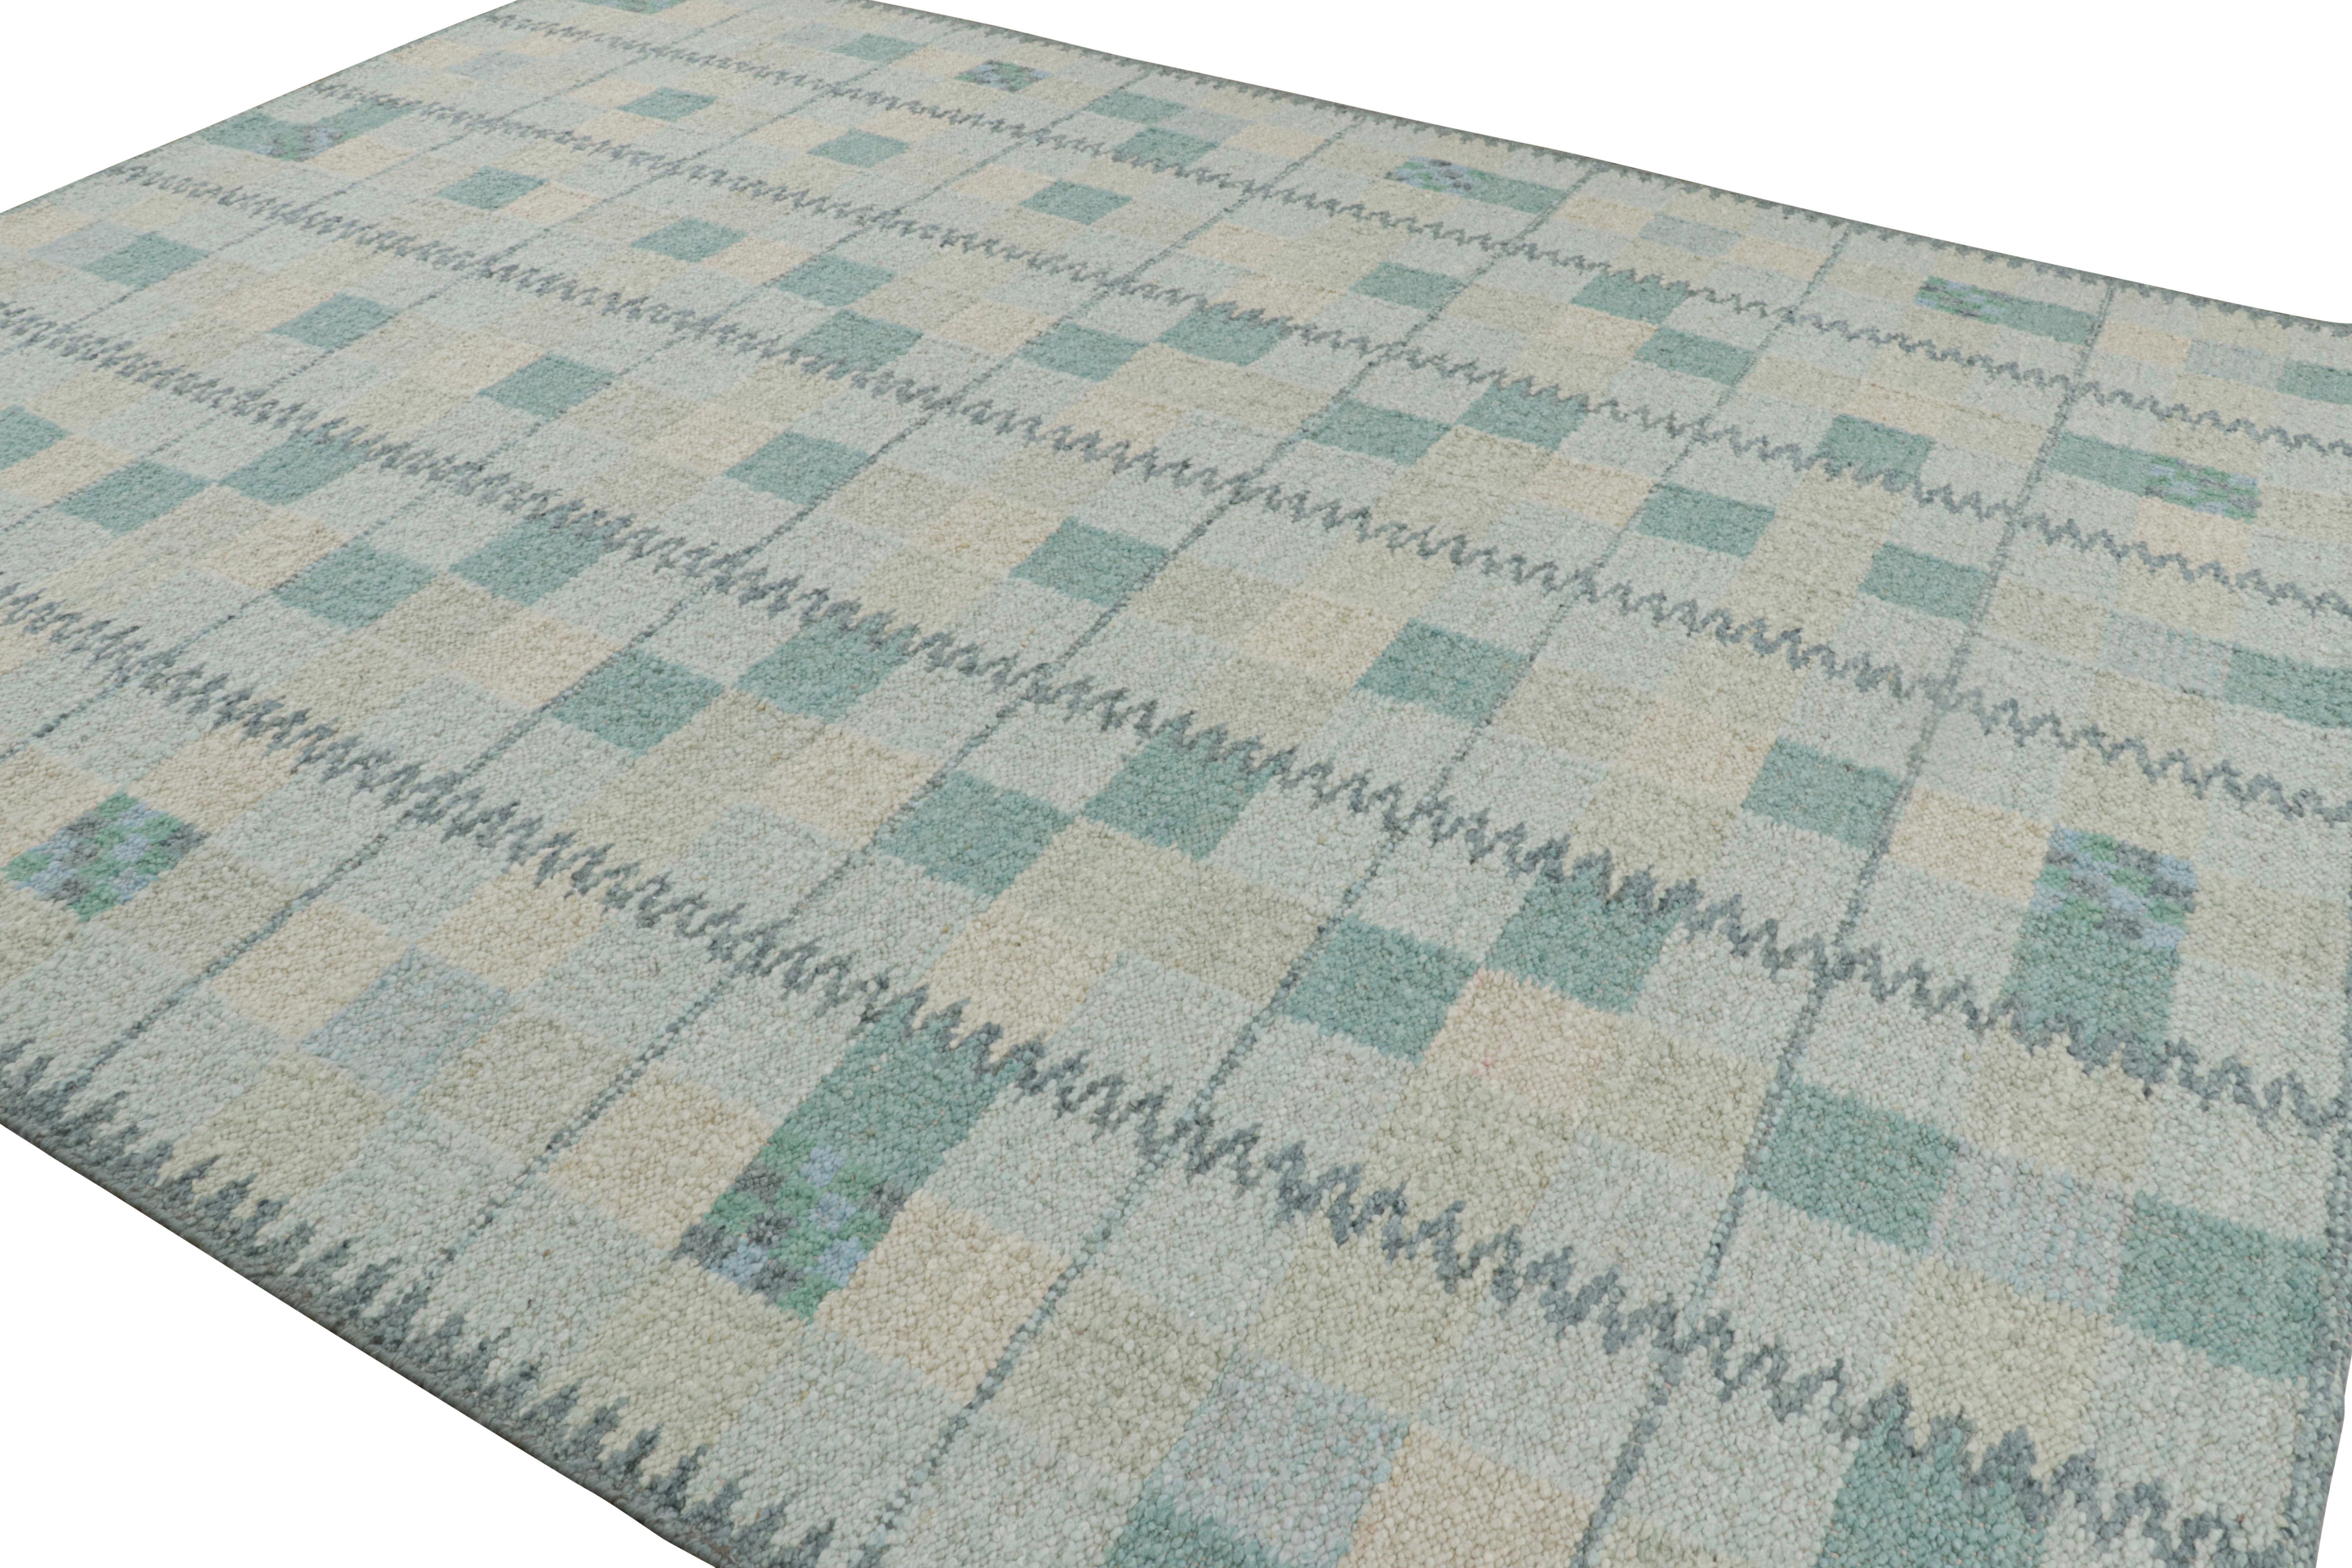 Indian Rug & Kilim’s Scandinavian Style Rug in Teal Blue Tones with Geometric Patterns For Sale